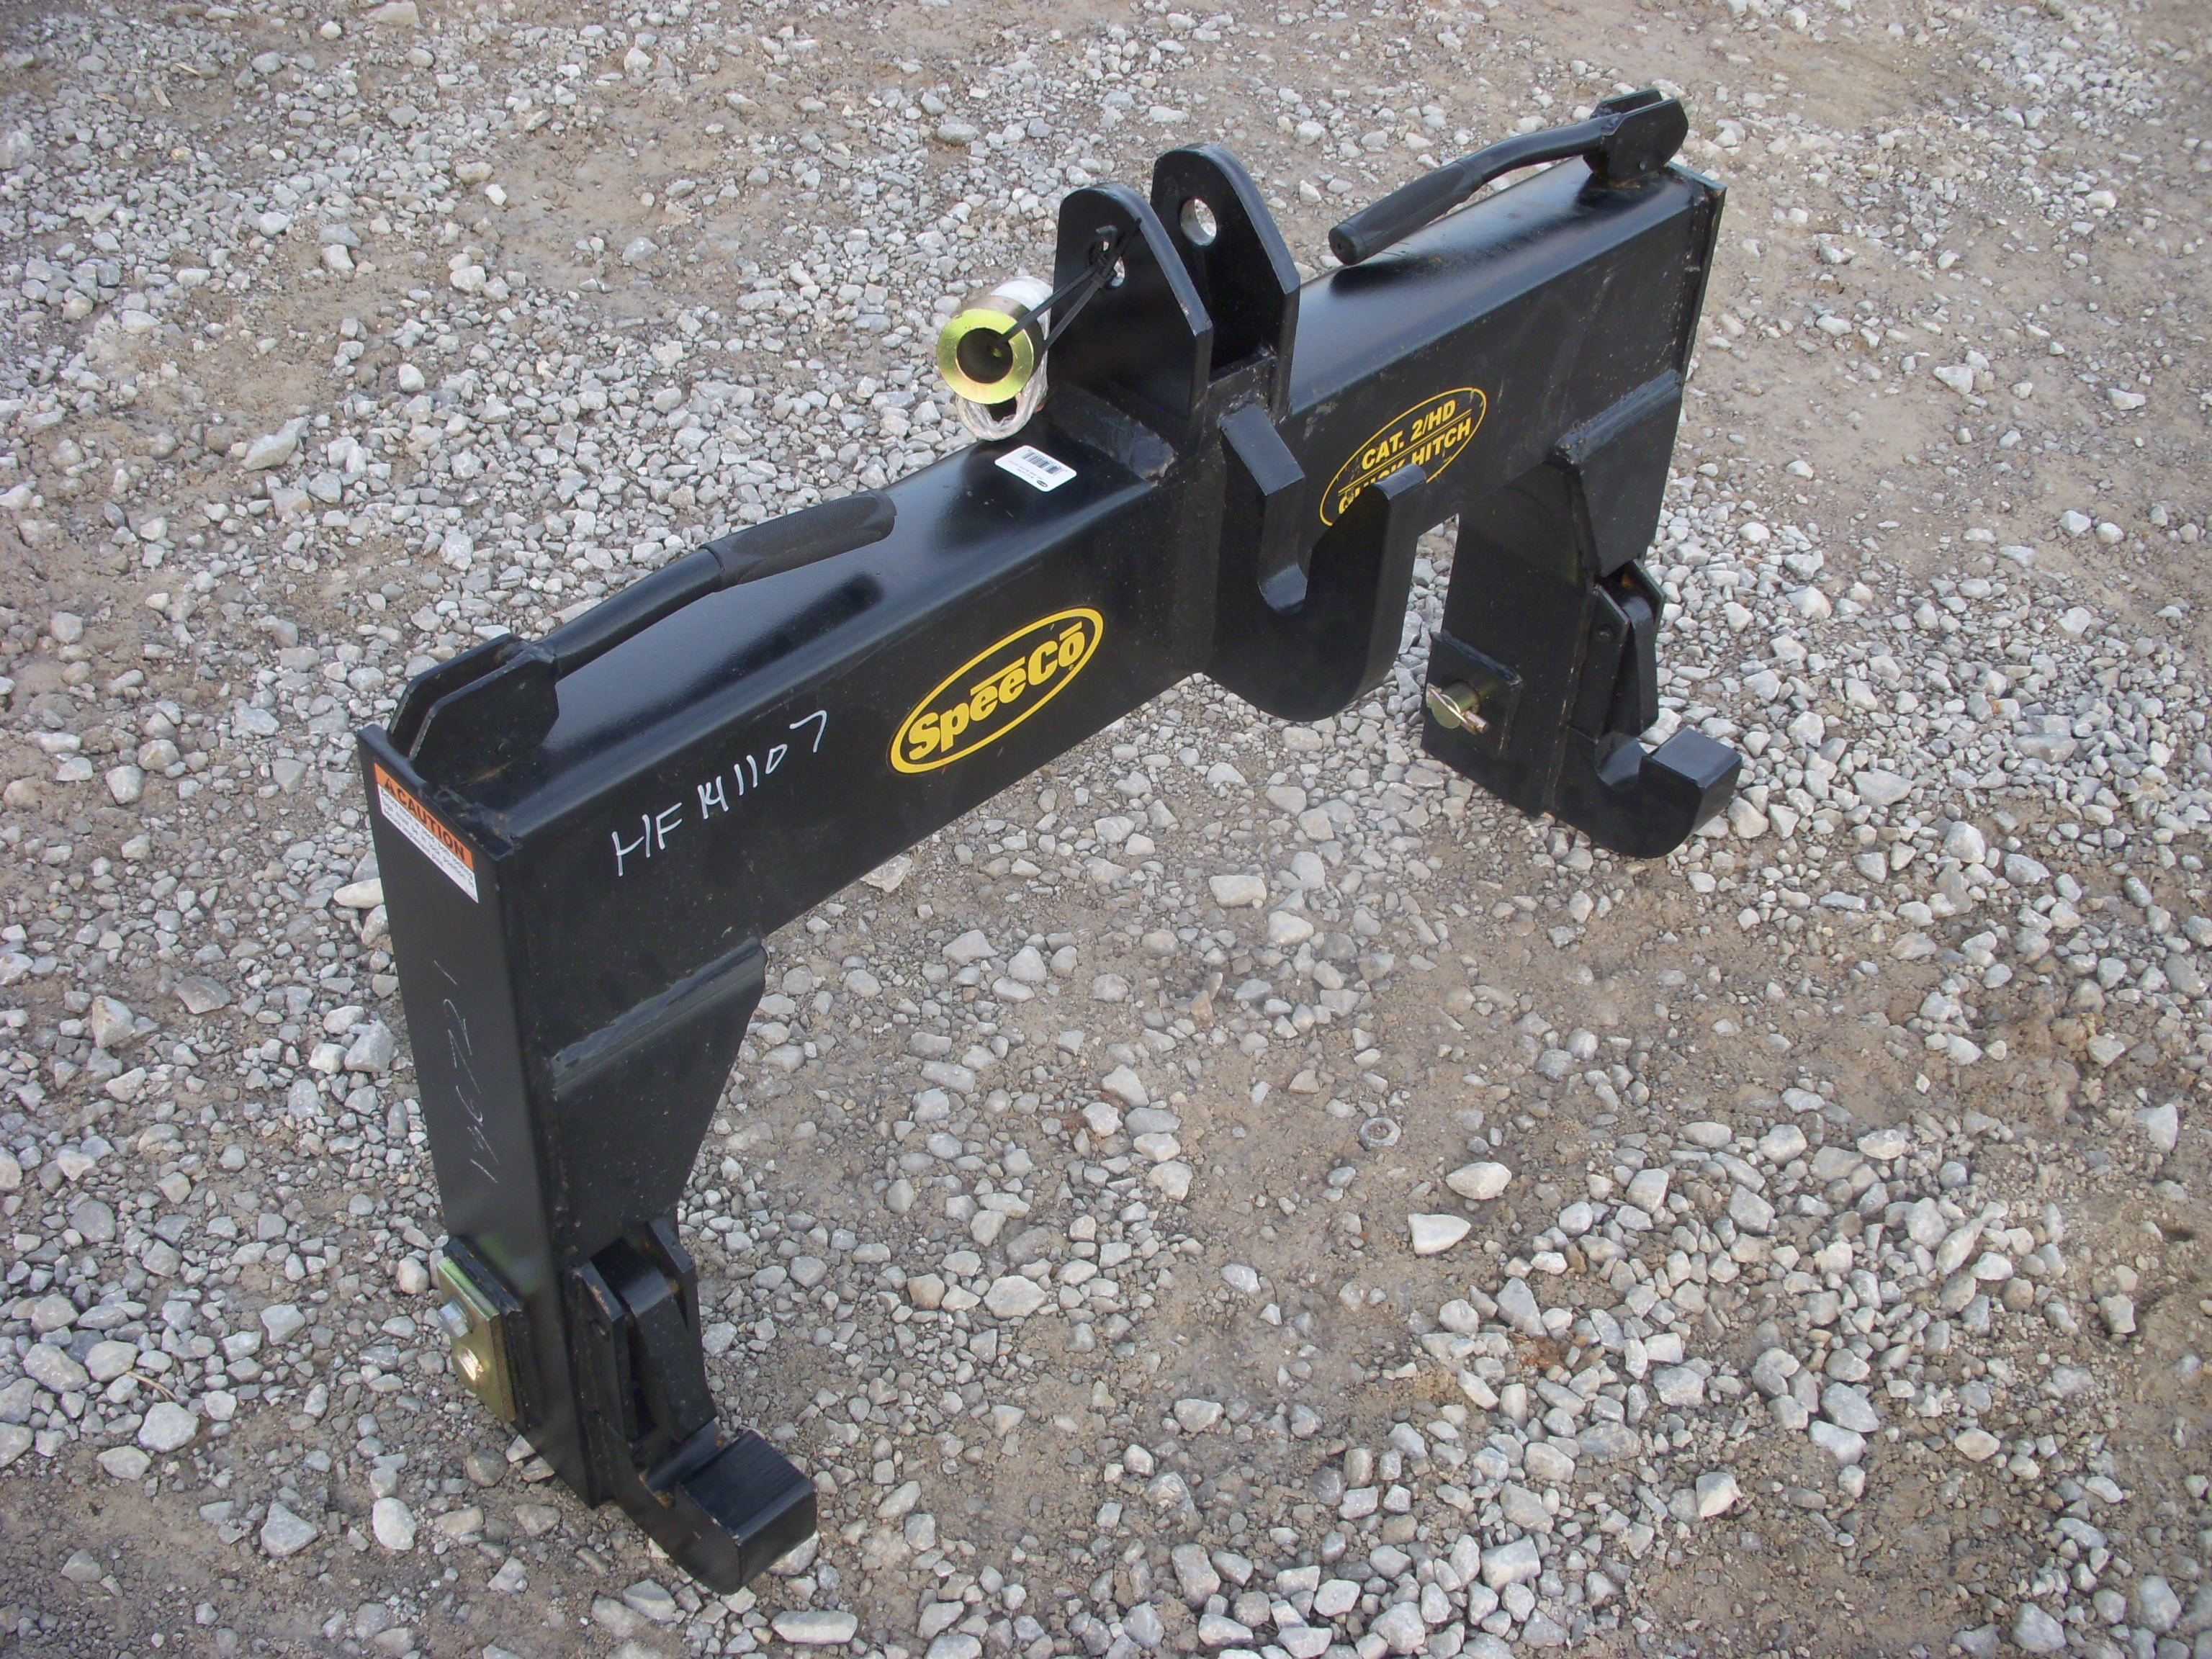 Point hitch attachments